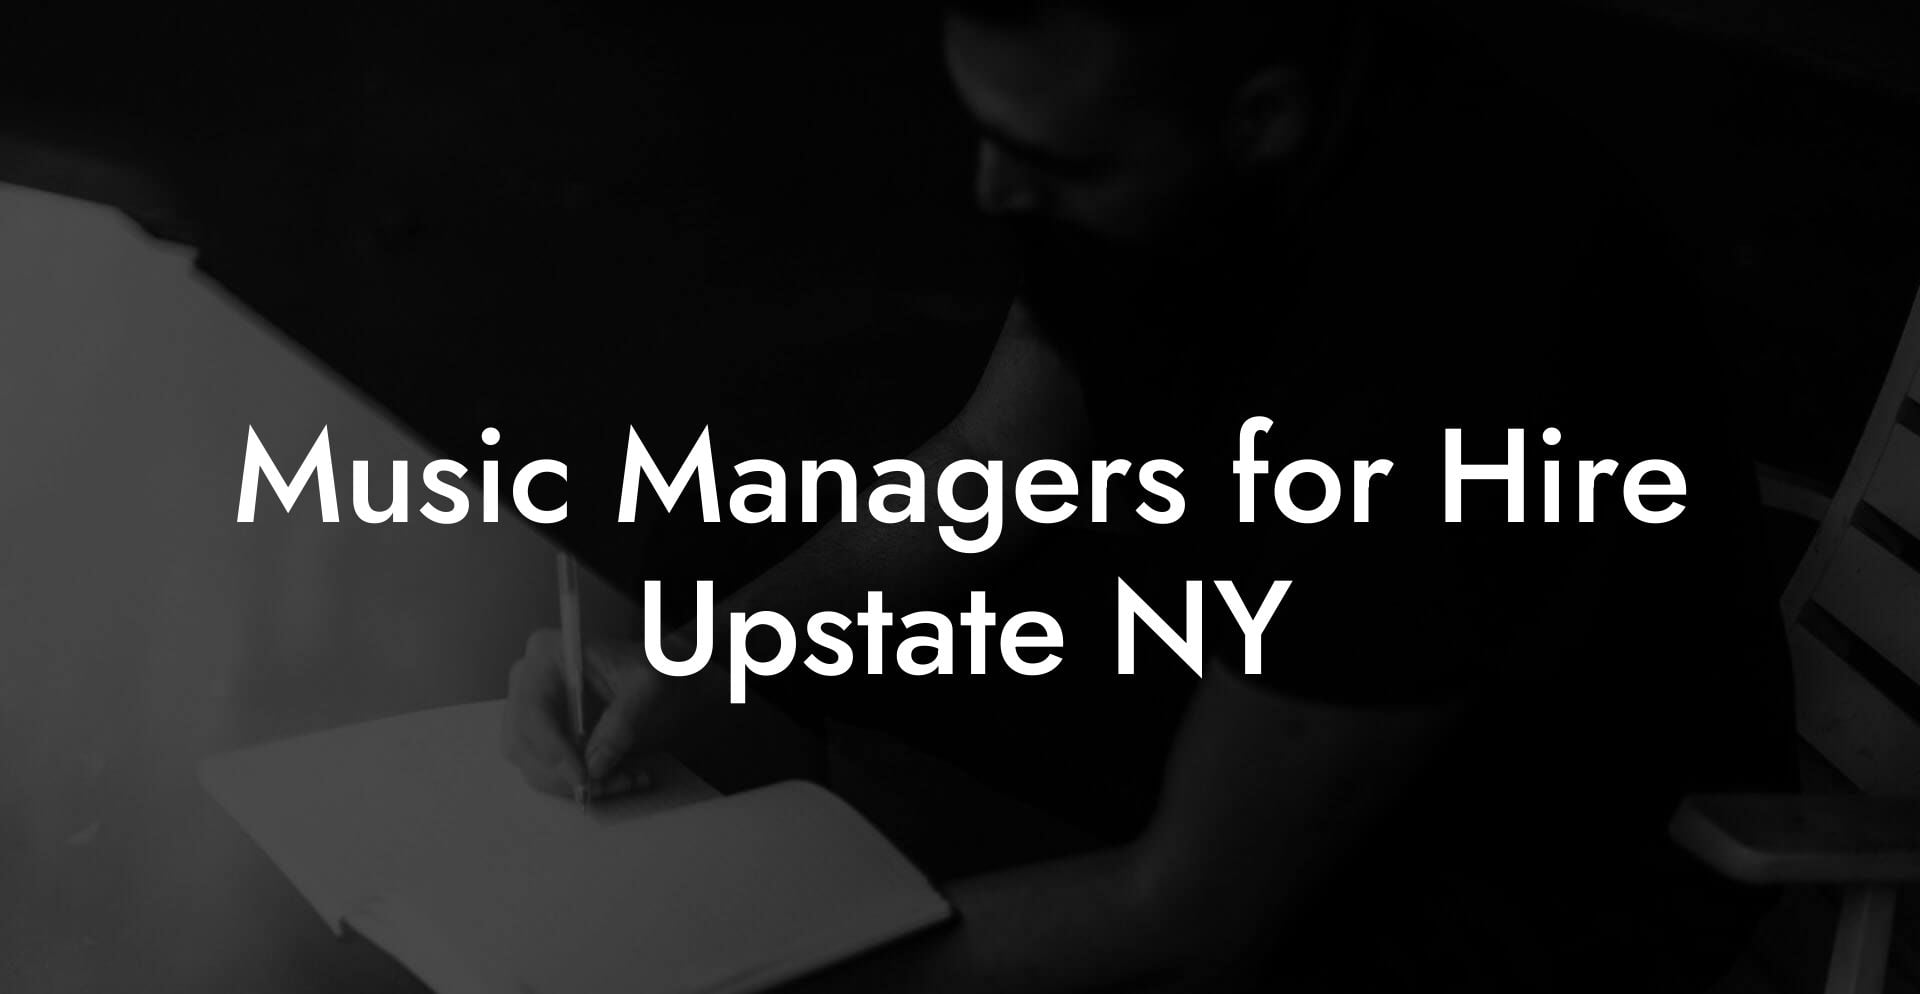 Music Managers for Hire Upstate NY